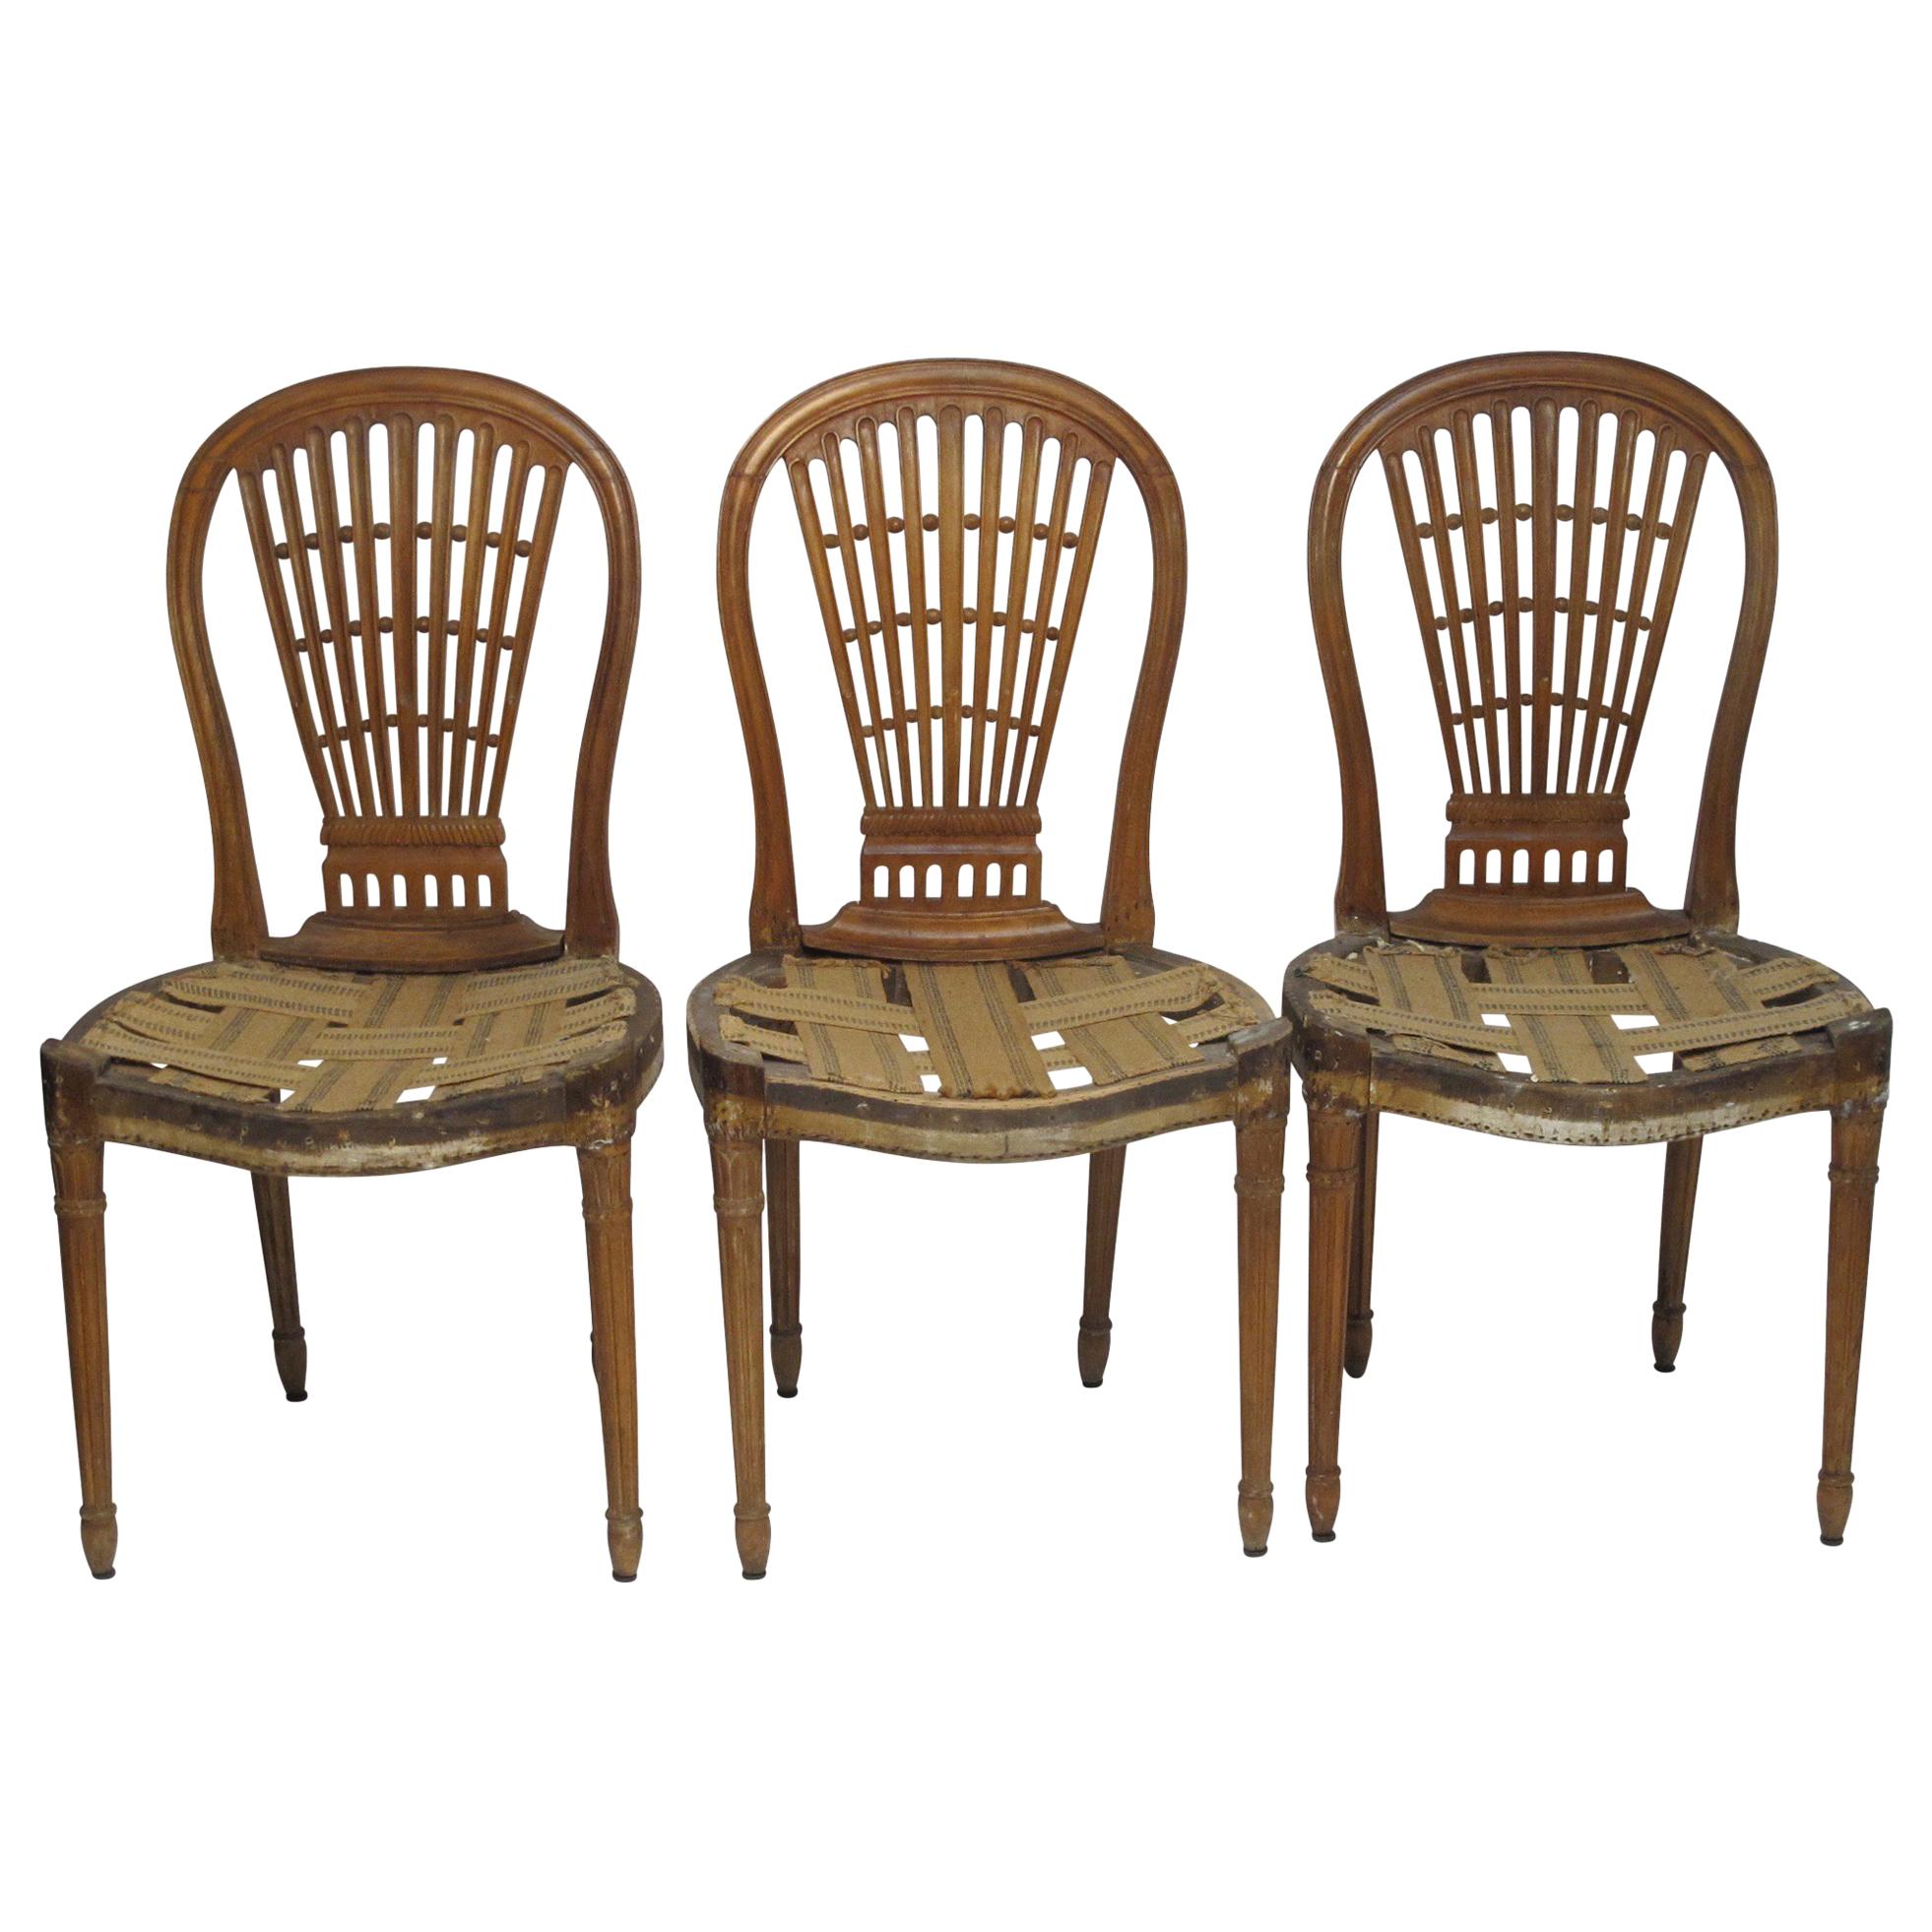 Set of Six Maison Jansen Balloon Back Dining Side Chairs, Early 20th Century For Sale